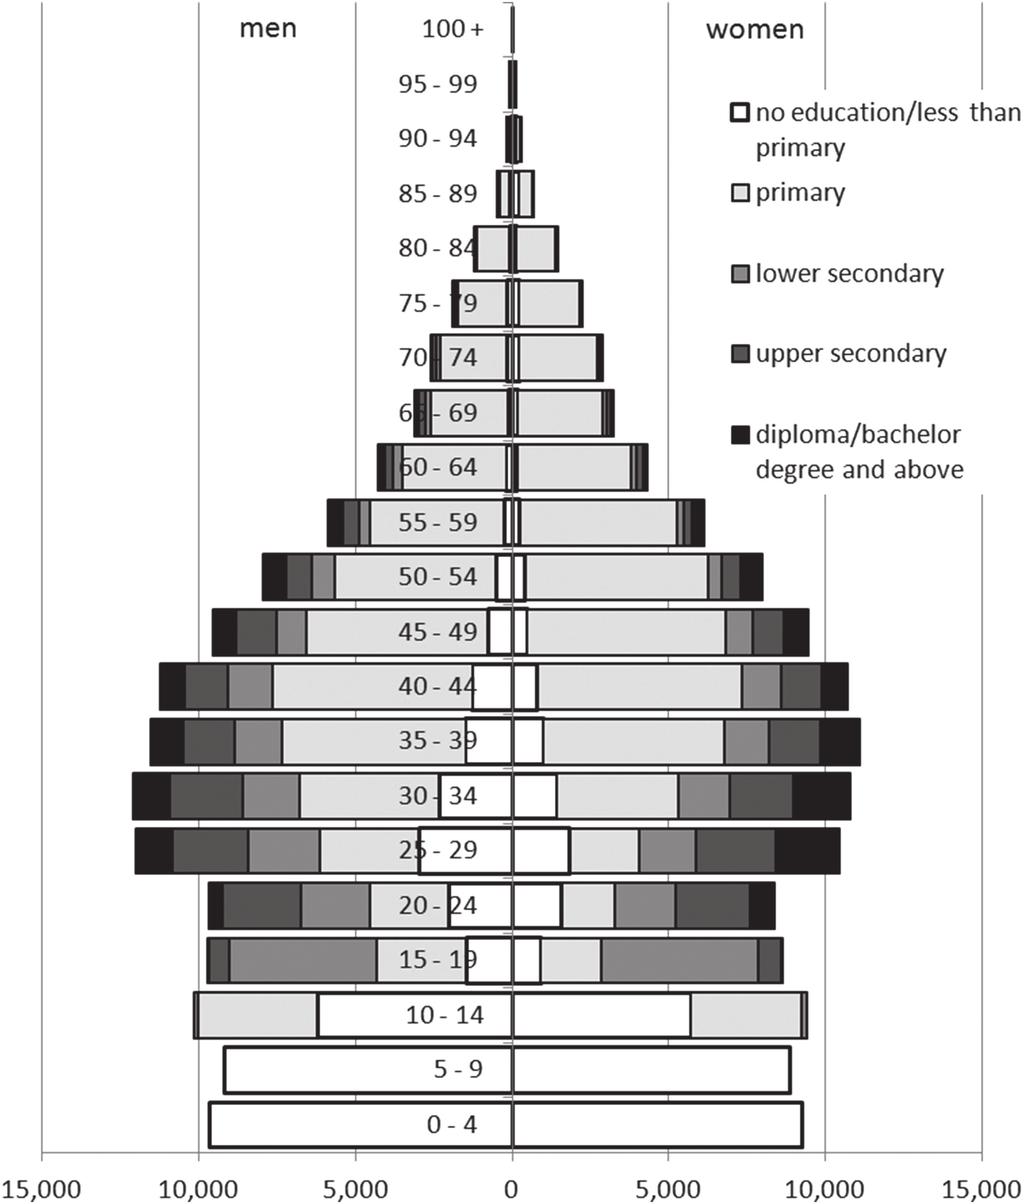 Elke Loichinger, Samir KC and Wolfgang Lutz 269 Figure 1: Population pyramid by age, sex, and highest level of educational attainment, Phang Nga, 2010 Source: Census 2010, data obtained from the